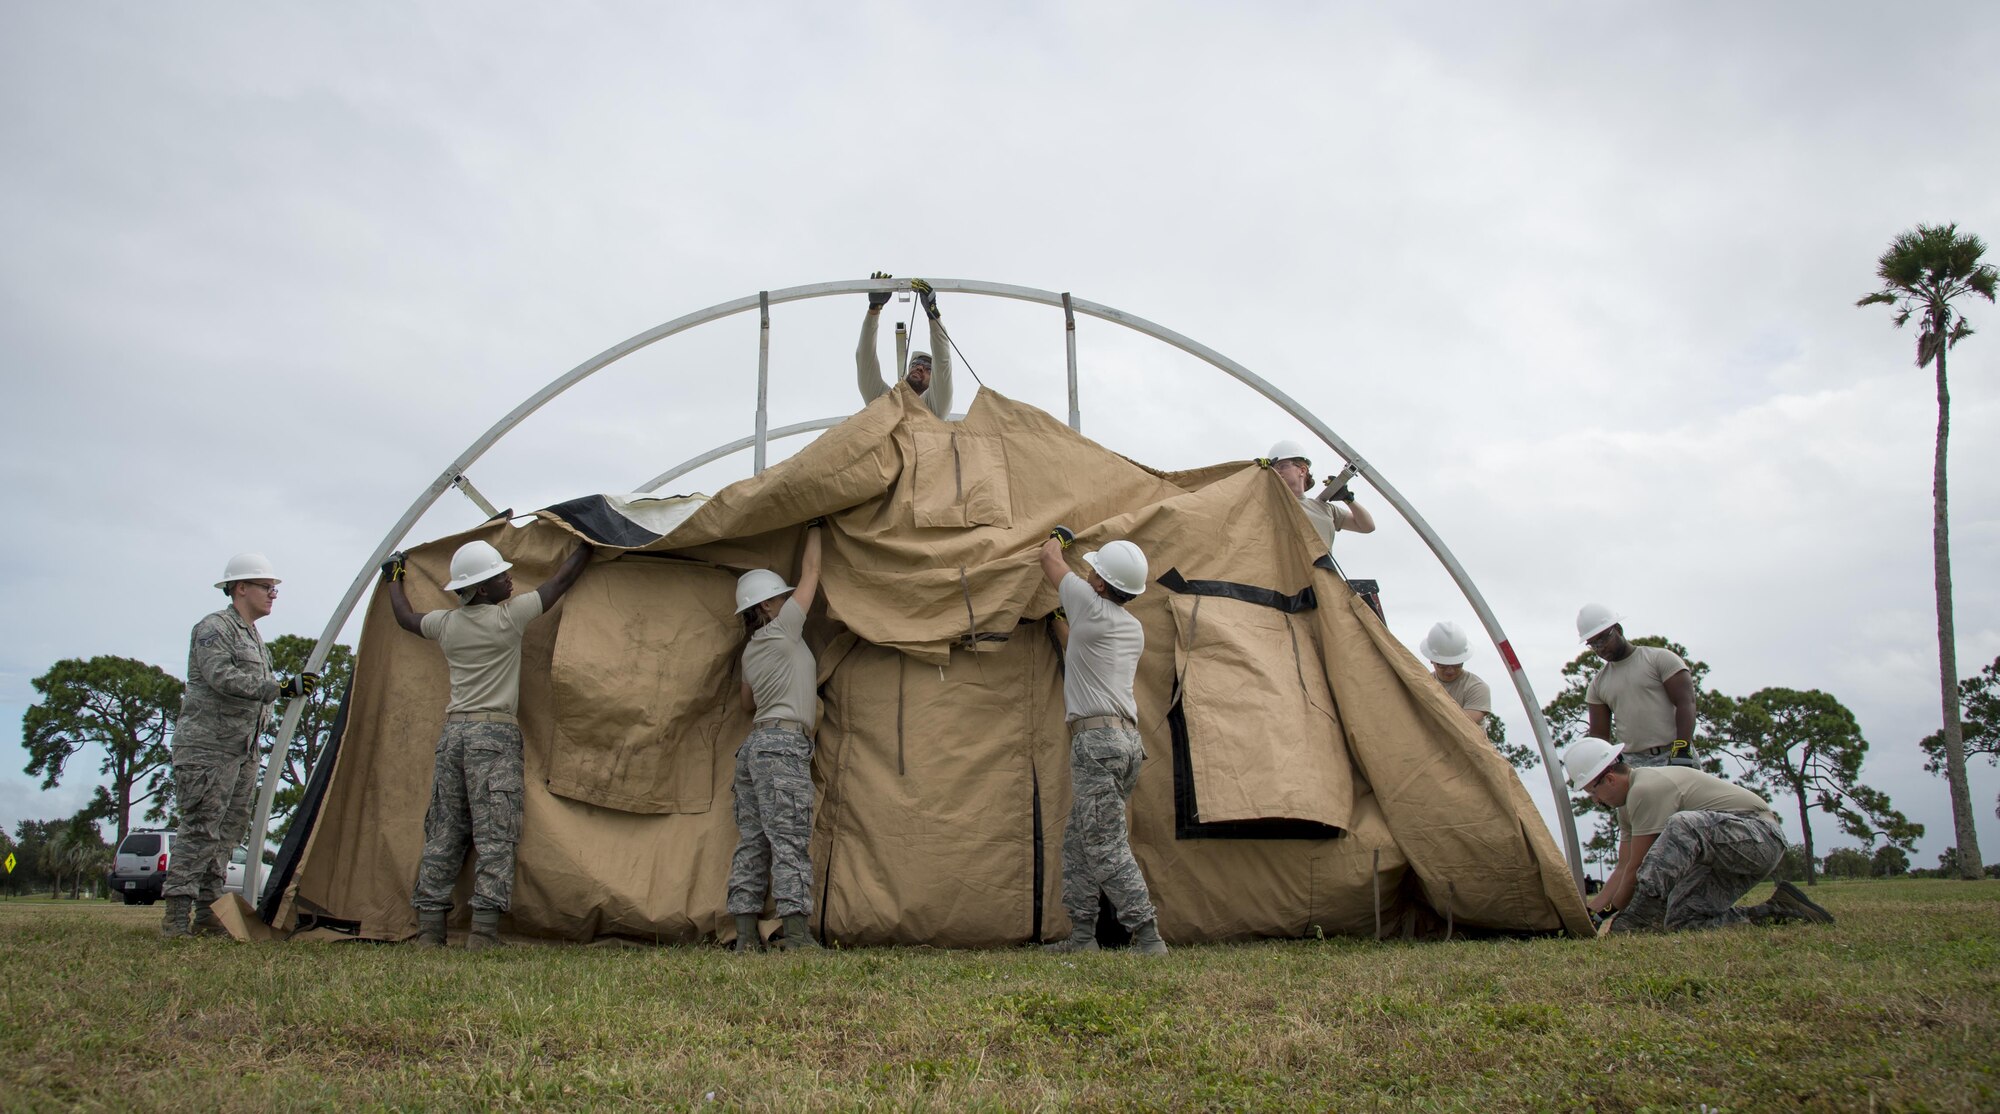 Services Airmen assigned to the 6th Force Support Squadron, put a tent covering over the structure of a Small Shelter System during Home Station Training at MacDill Air Force Base, Fla., Oct. 5, 2017. The Small Shelter System is a tent used for lodging and can also be used as a fitness or recreation tent. (U.S. Air Force photo by Senior Airman Mariette Adams)